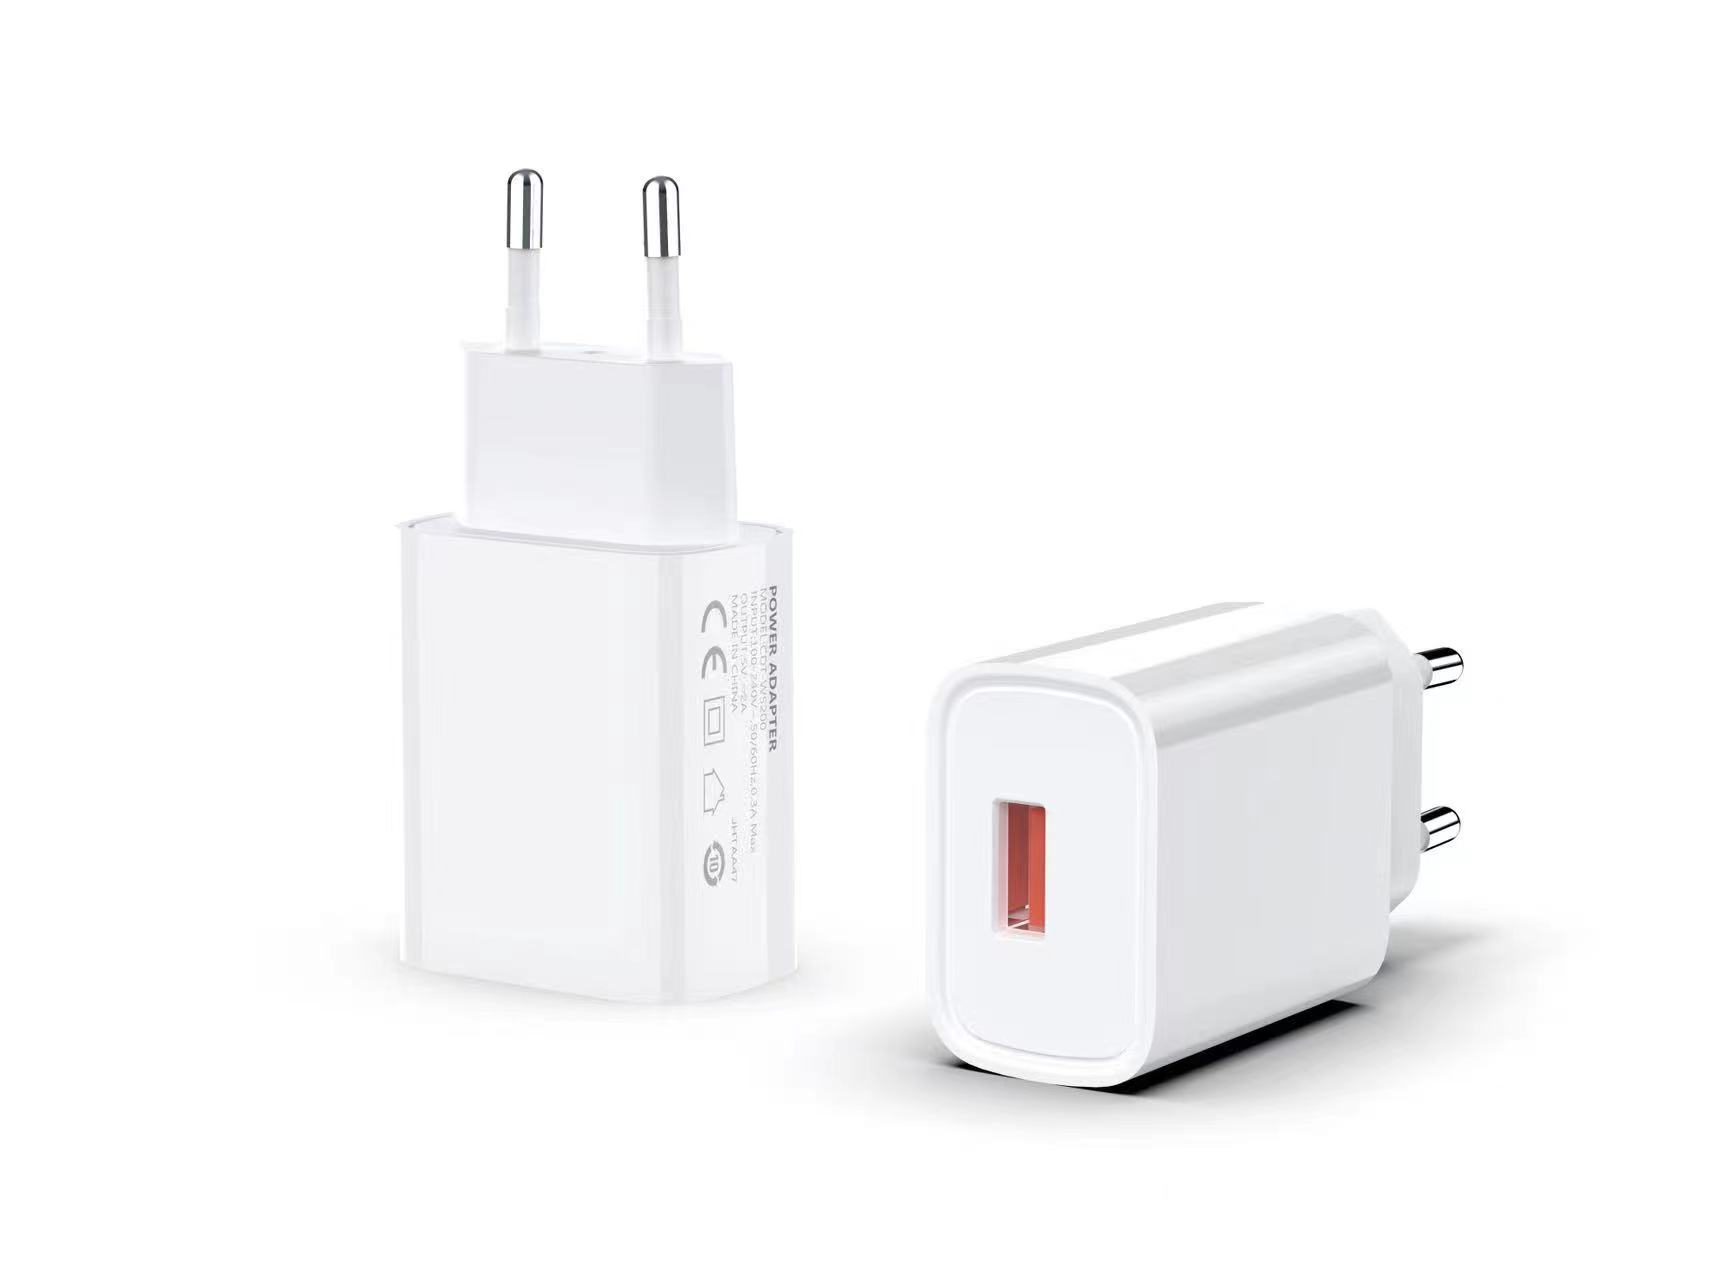 NINE DUAL USB CHARGER PORT A+C PD 20W CHARGER